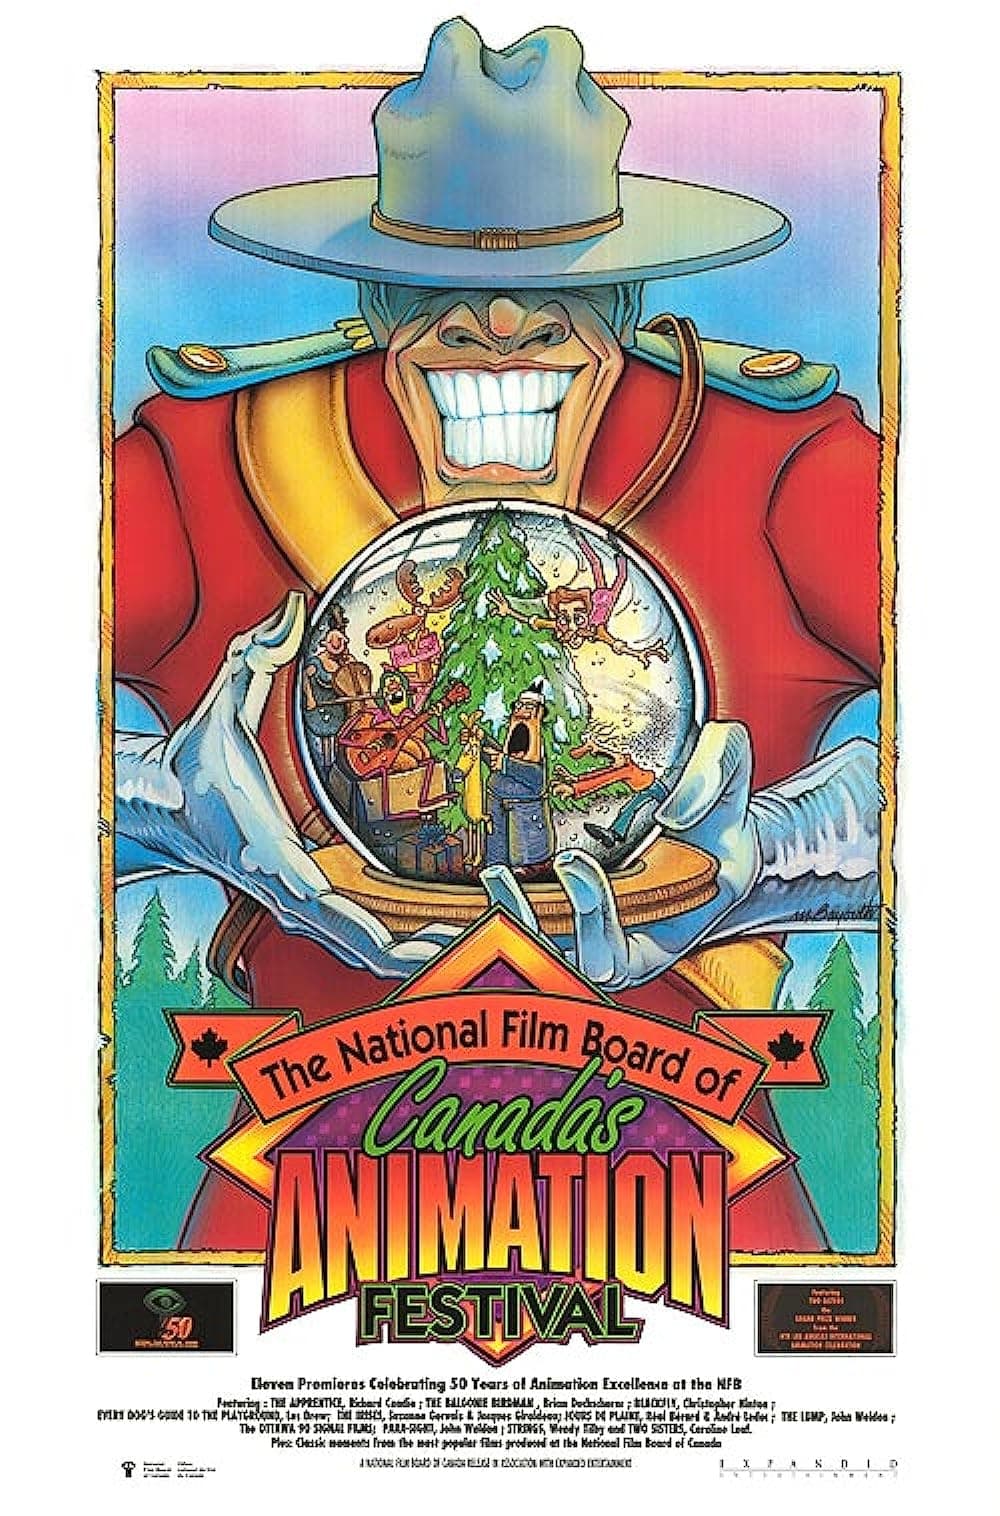 The National Film Board of Canada's Animation Festival